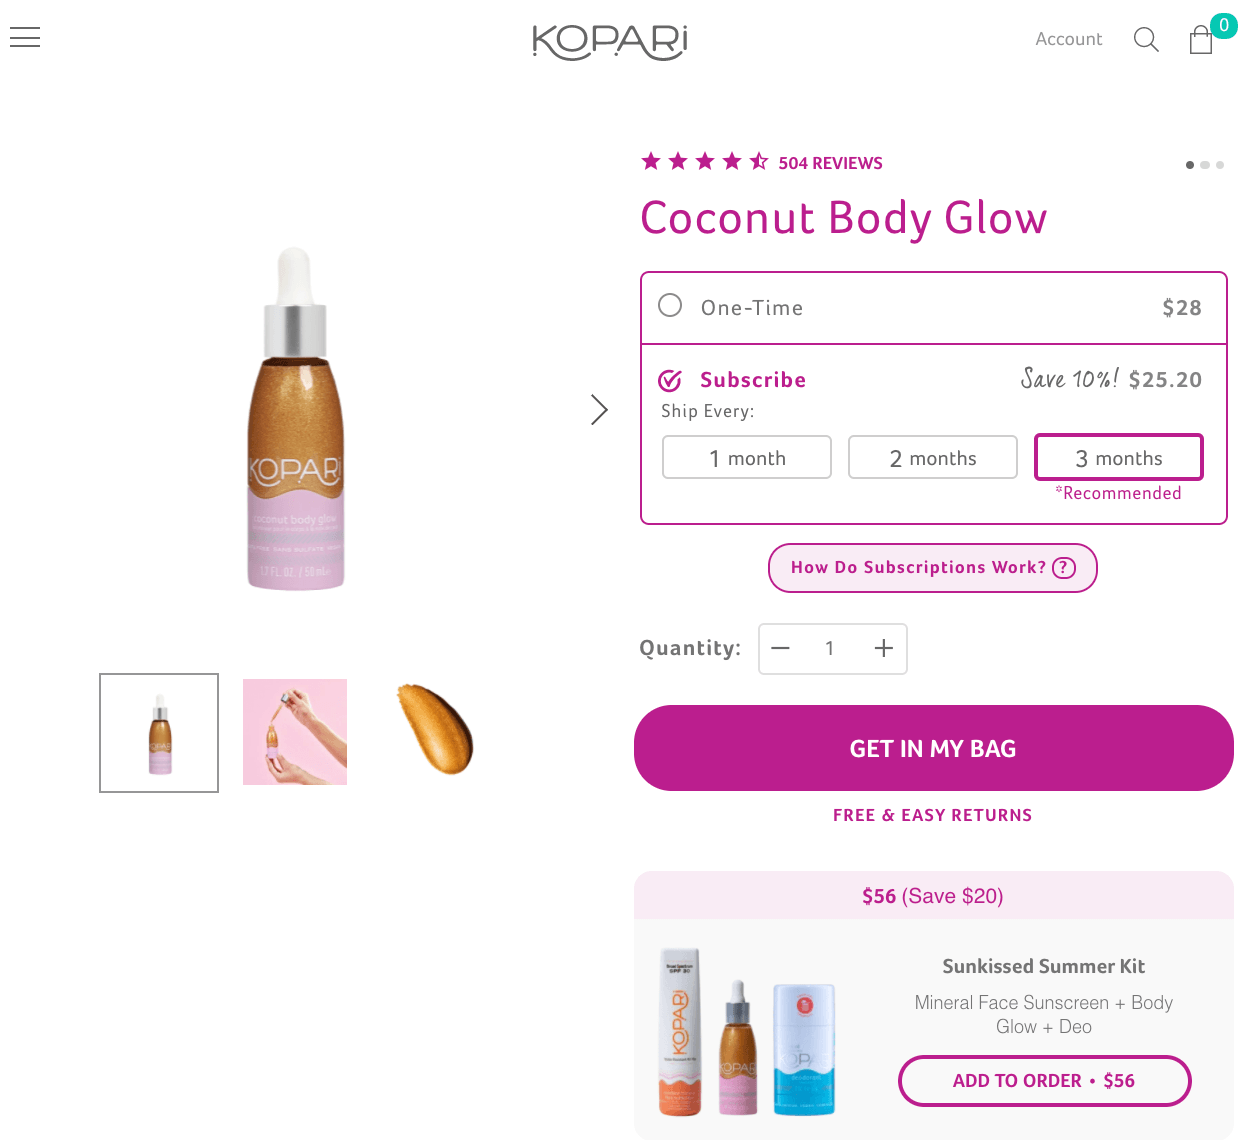 Kopari Beauty offers replenishment subscriptions to individual products.